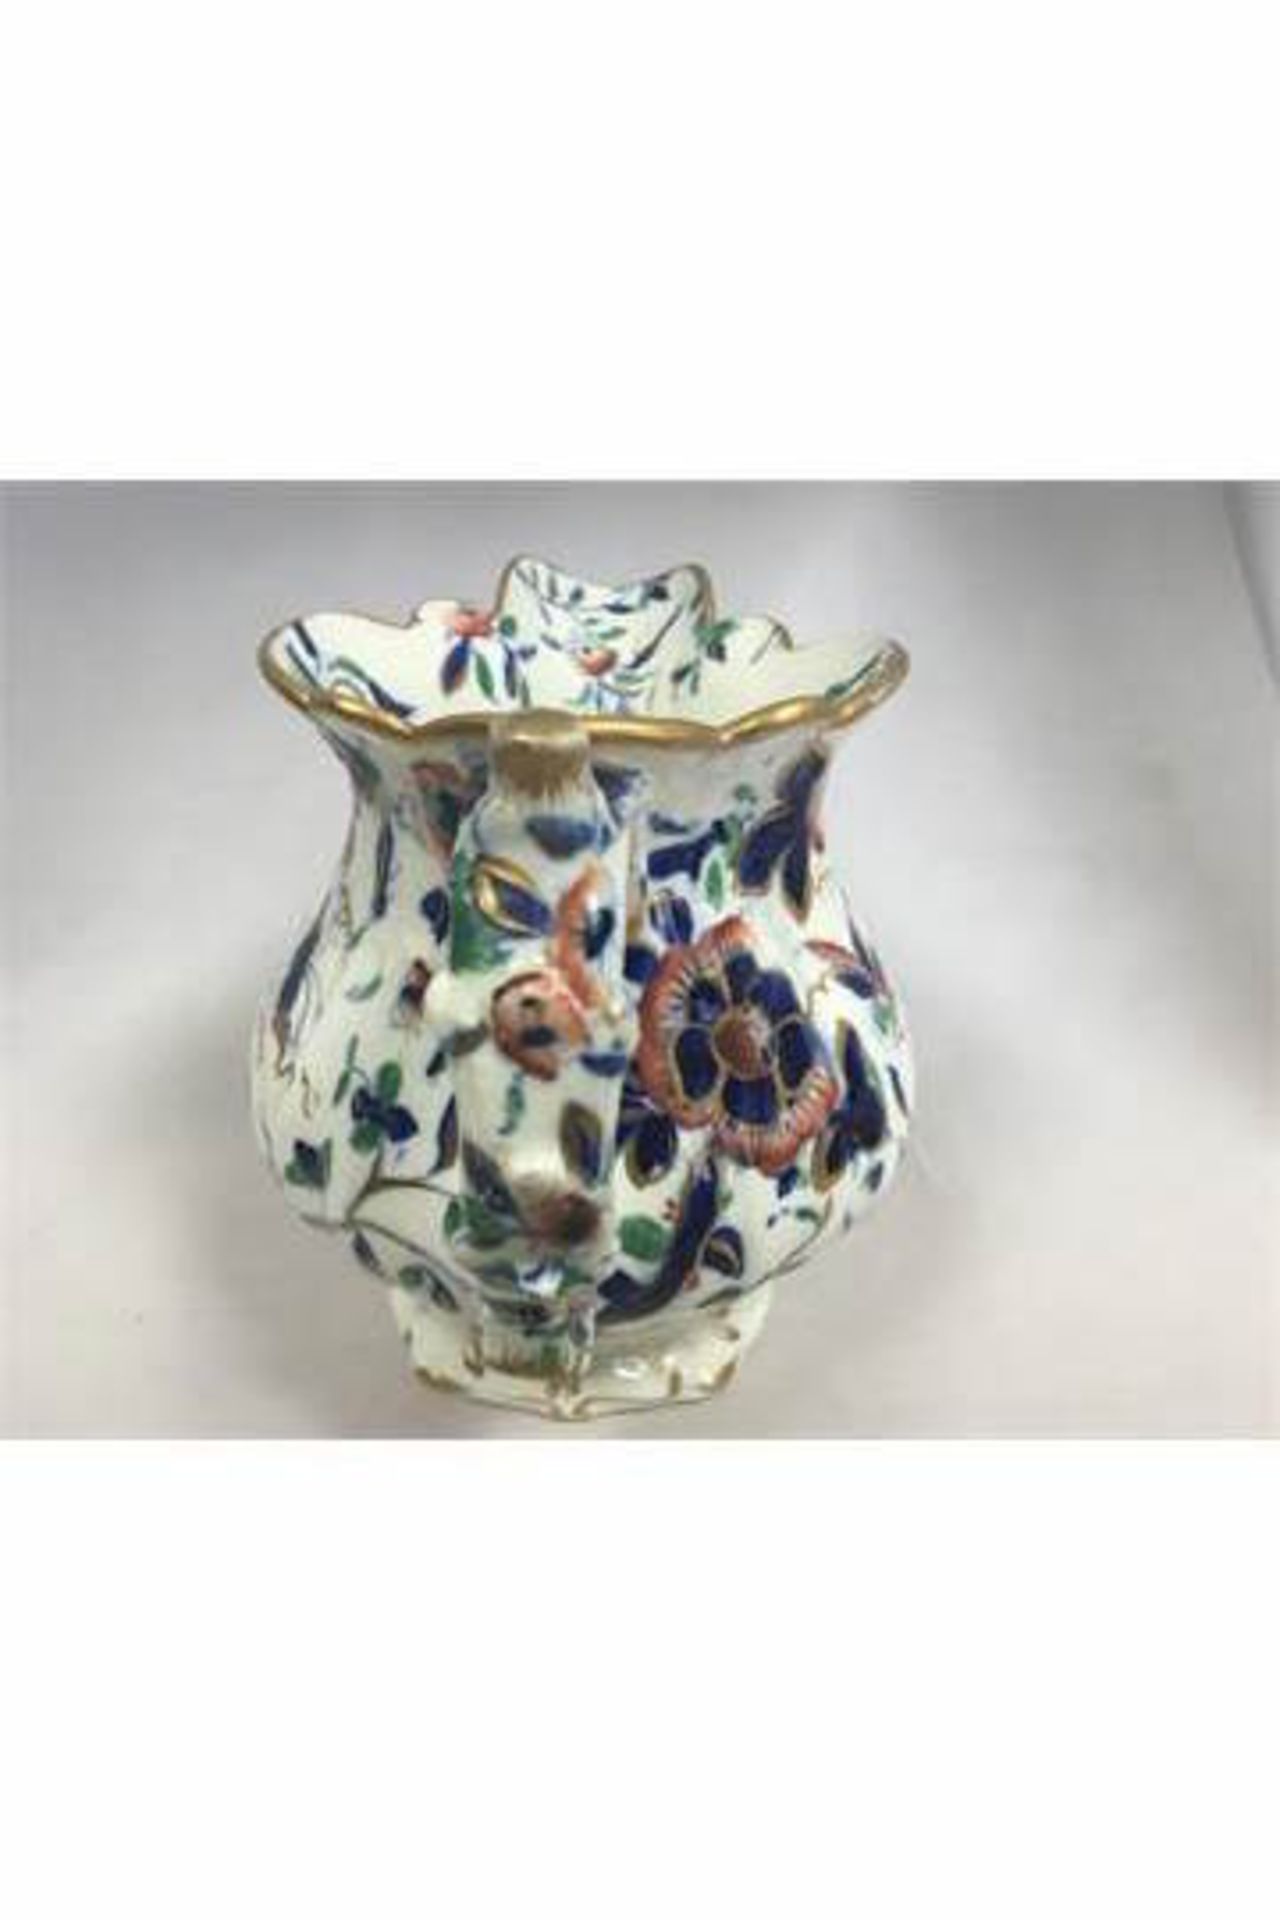 A 19TH CENTURY STAFFORDSHIRE IMARI JUG. HANDPAINTED WITH GILT EDGING. FREE UK DELIVERY. - Image 4 of 5